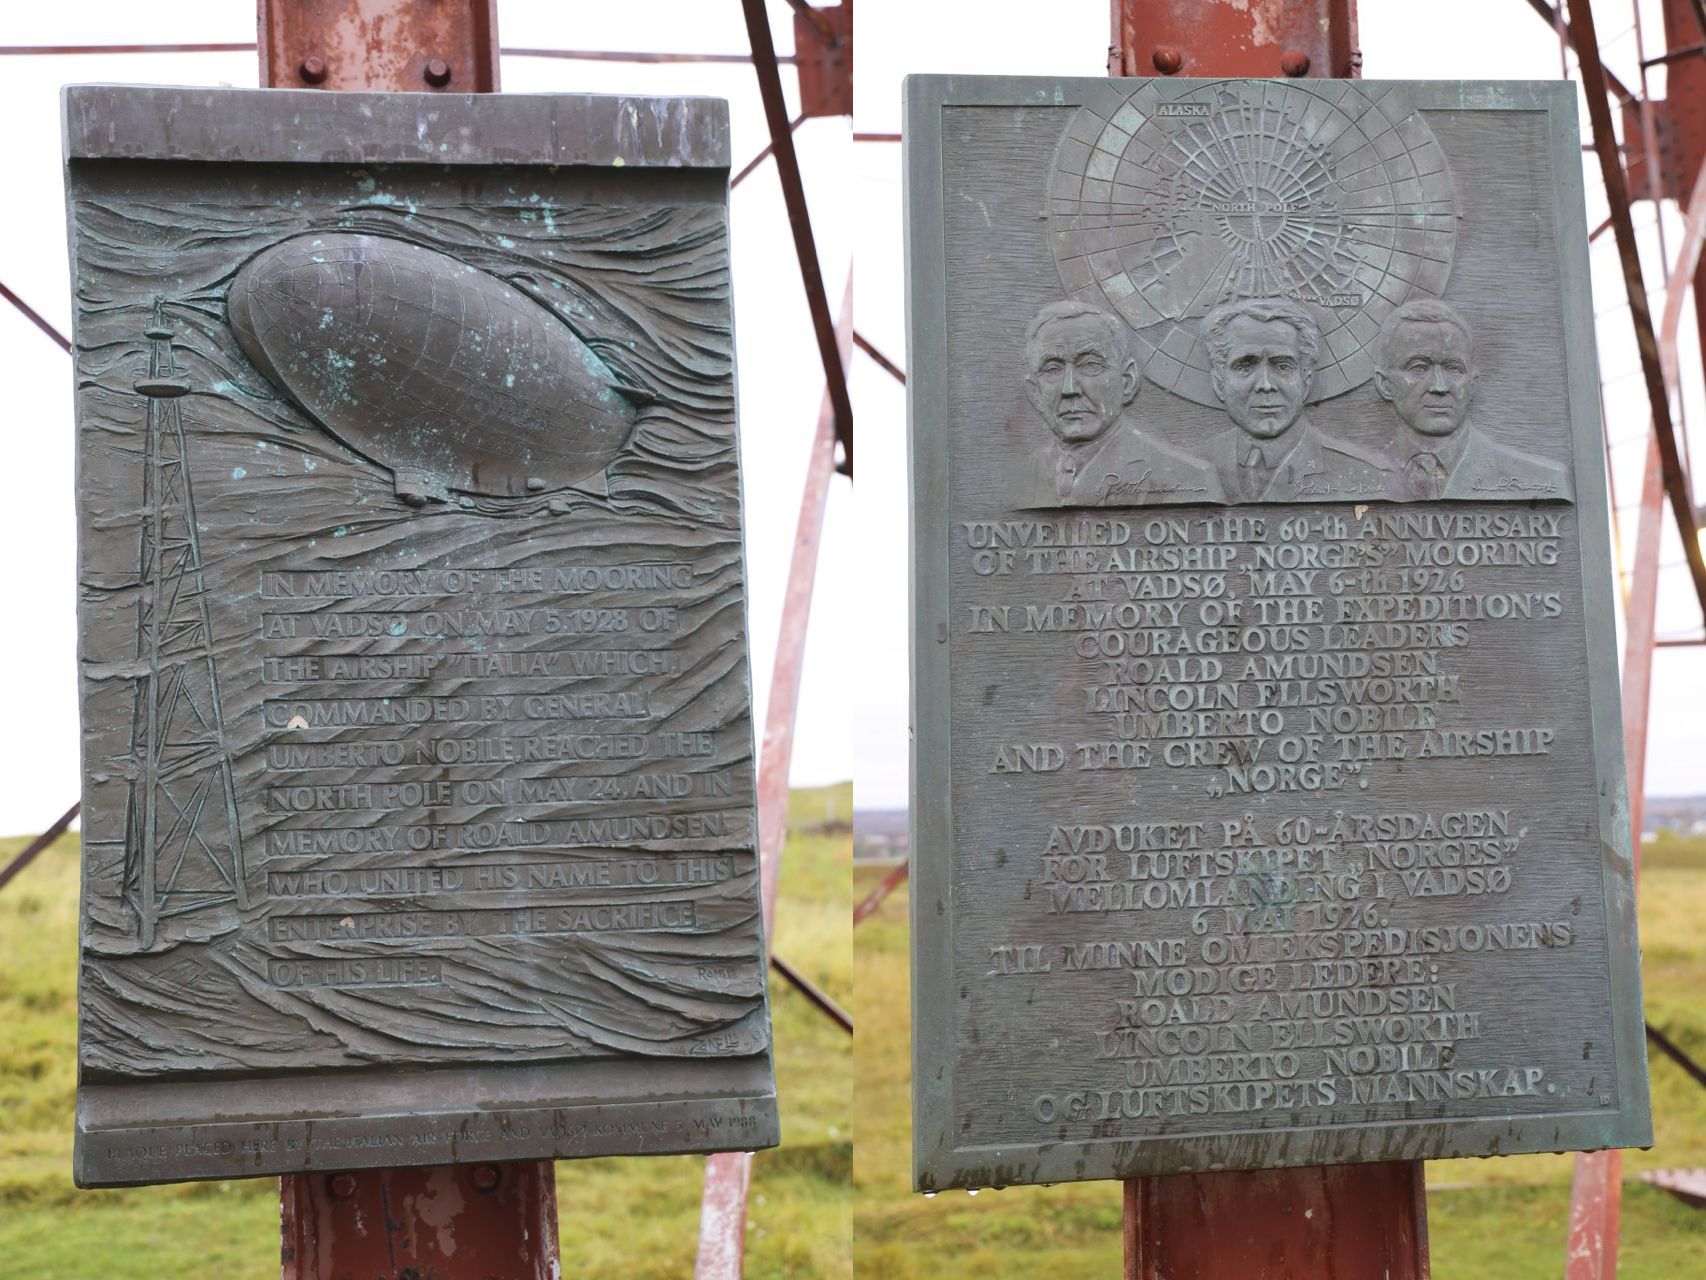 Plaques on Vadsø mast